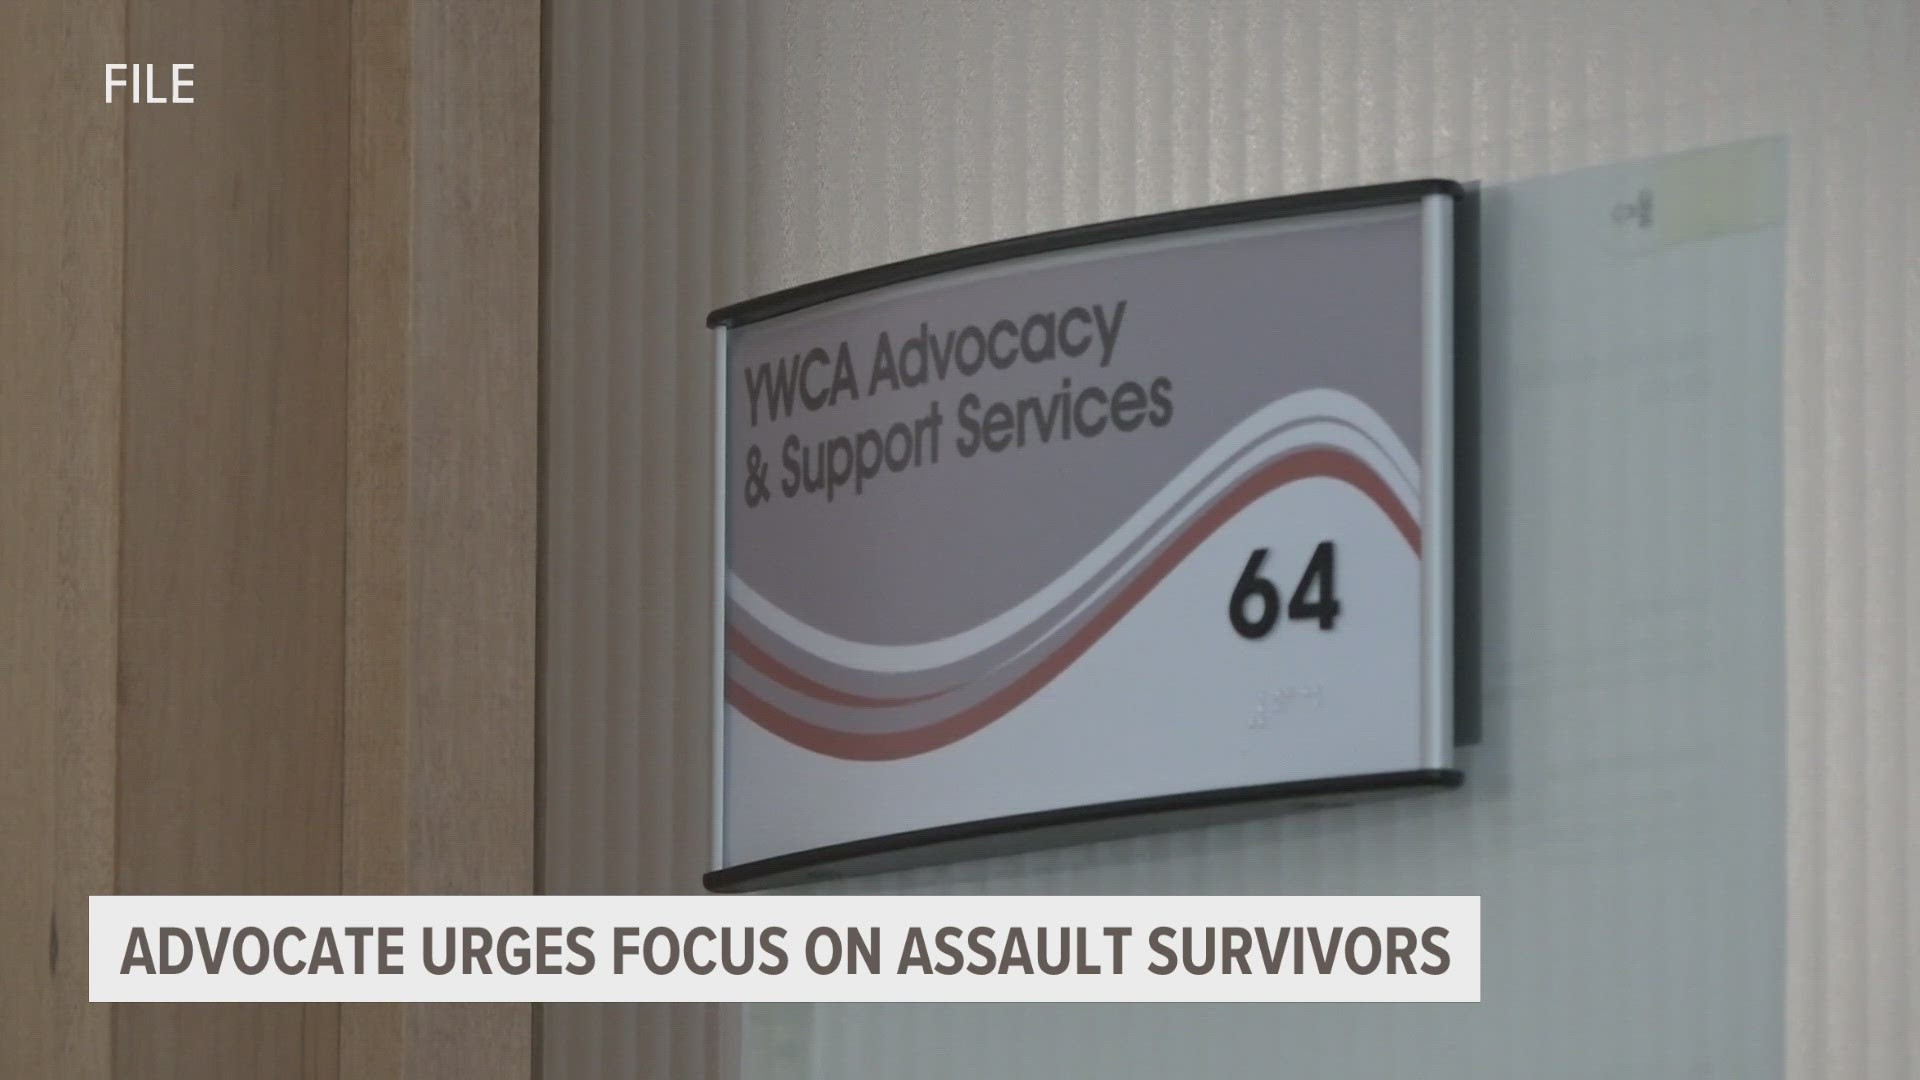 The advocate warned against the general public focusing attention on the suspect, and instead urged it be placed on the survivors and what can be done for them.